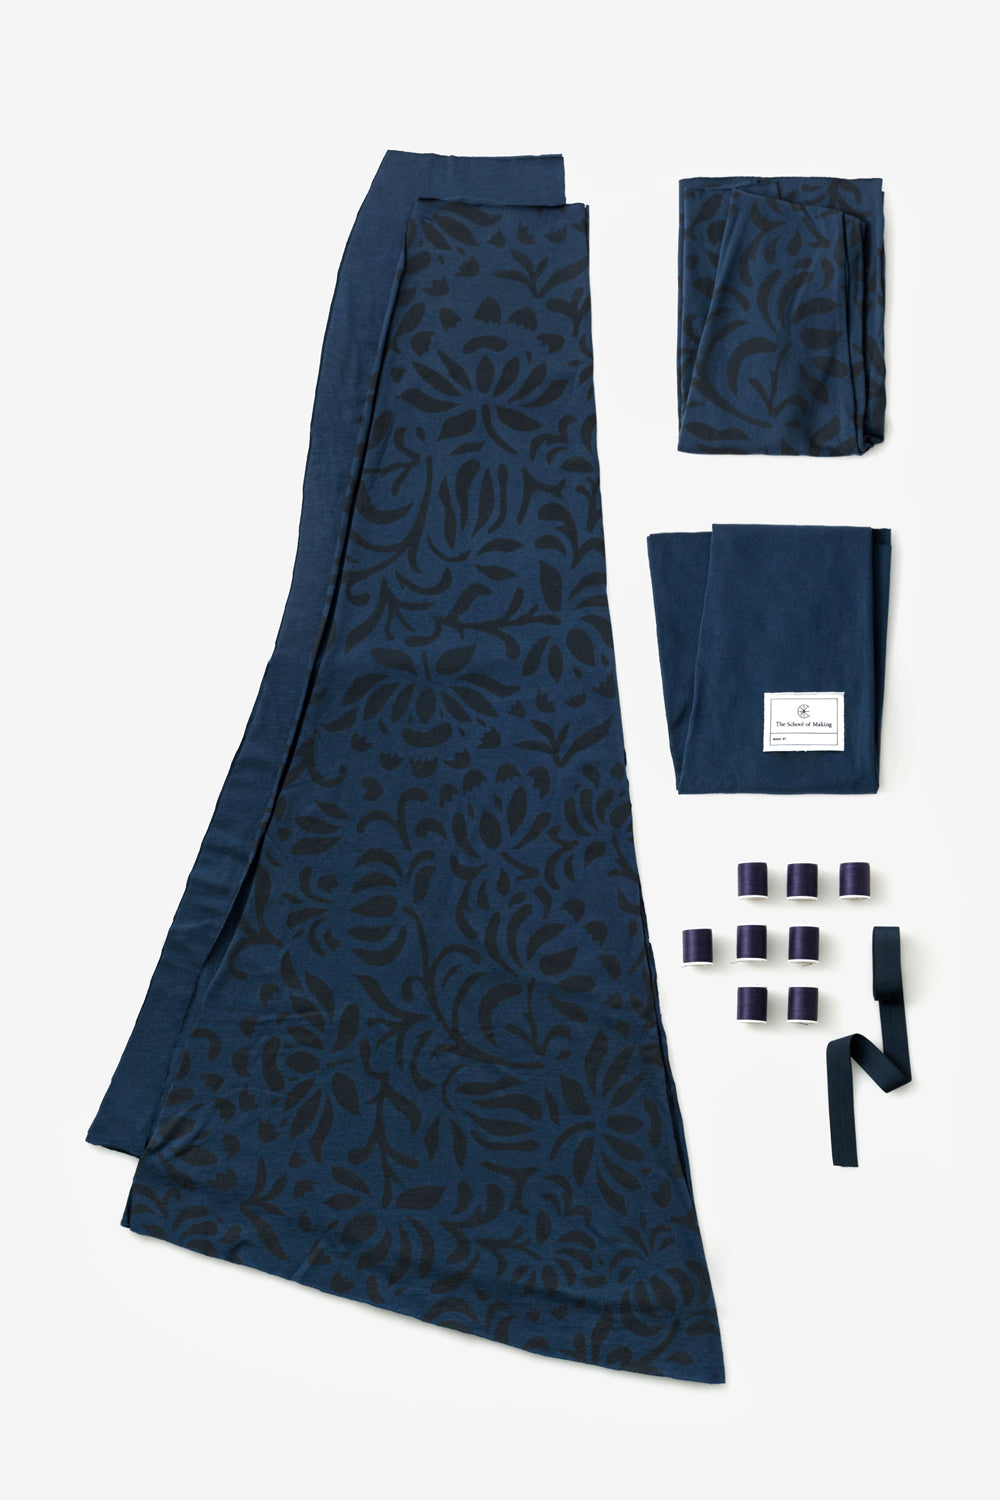 The Long Skirt Kit in Peacock with Anna's Garden stencil.